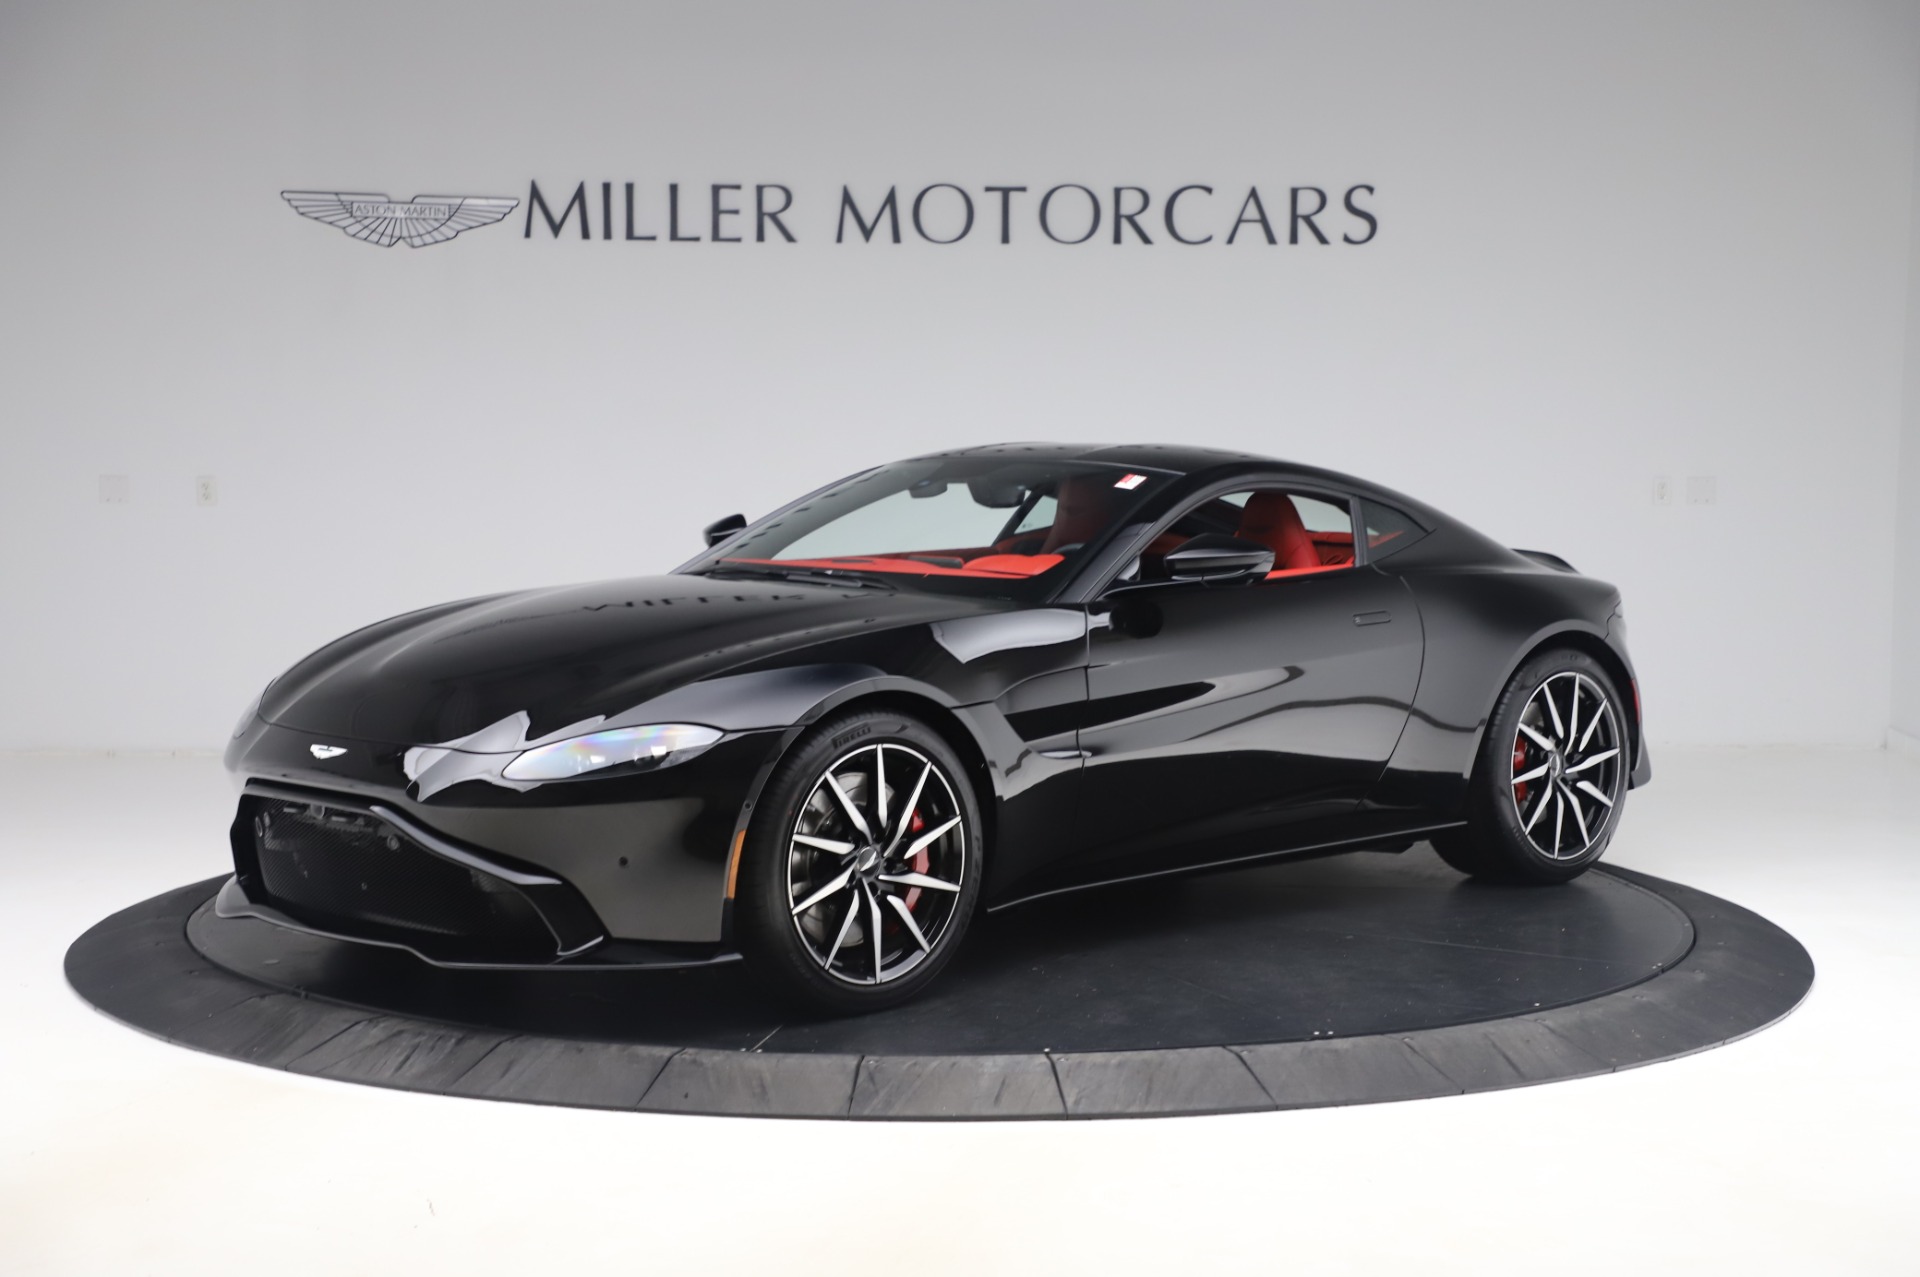 New 2020 Aston Martin Vantage for sale Sold at Aston Martin of Greenwich in Greenwich CT 06830 1